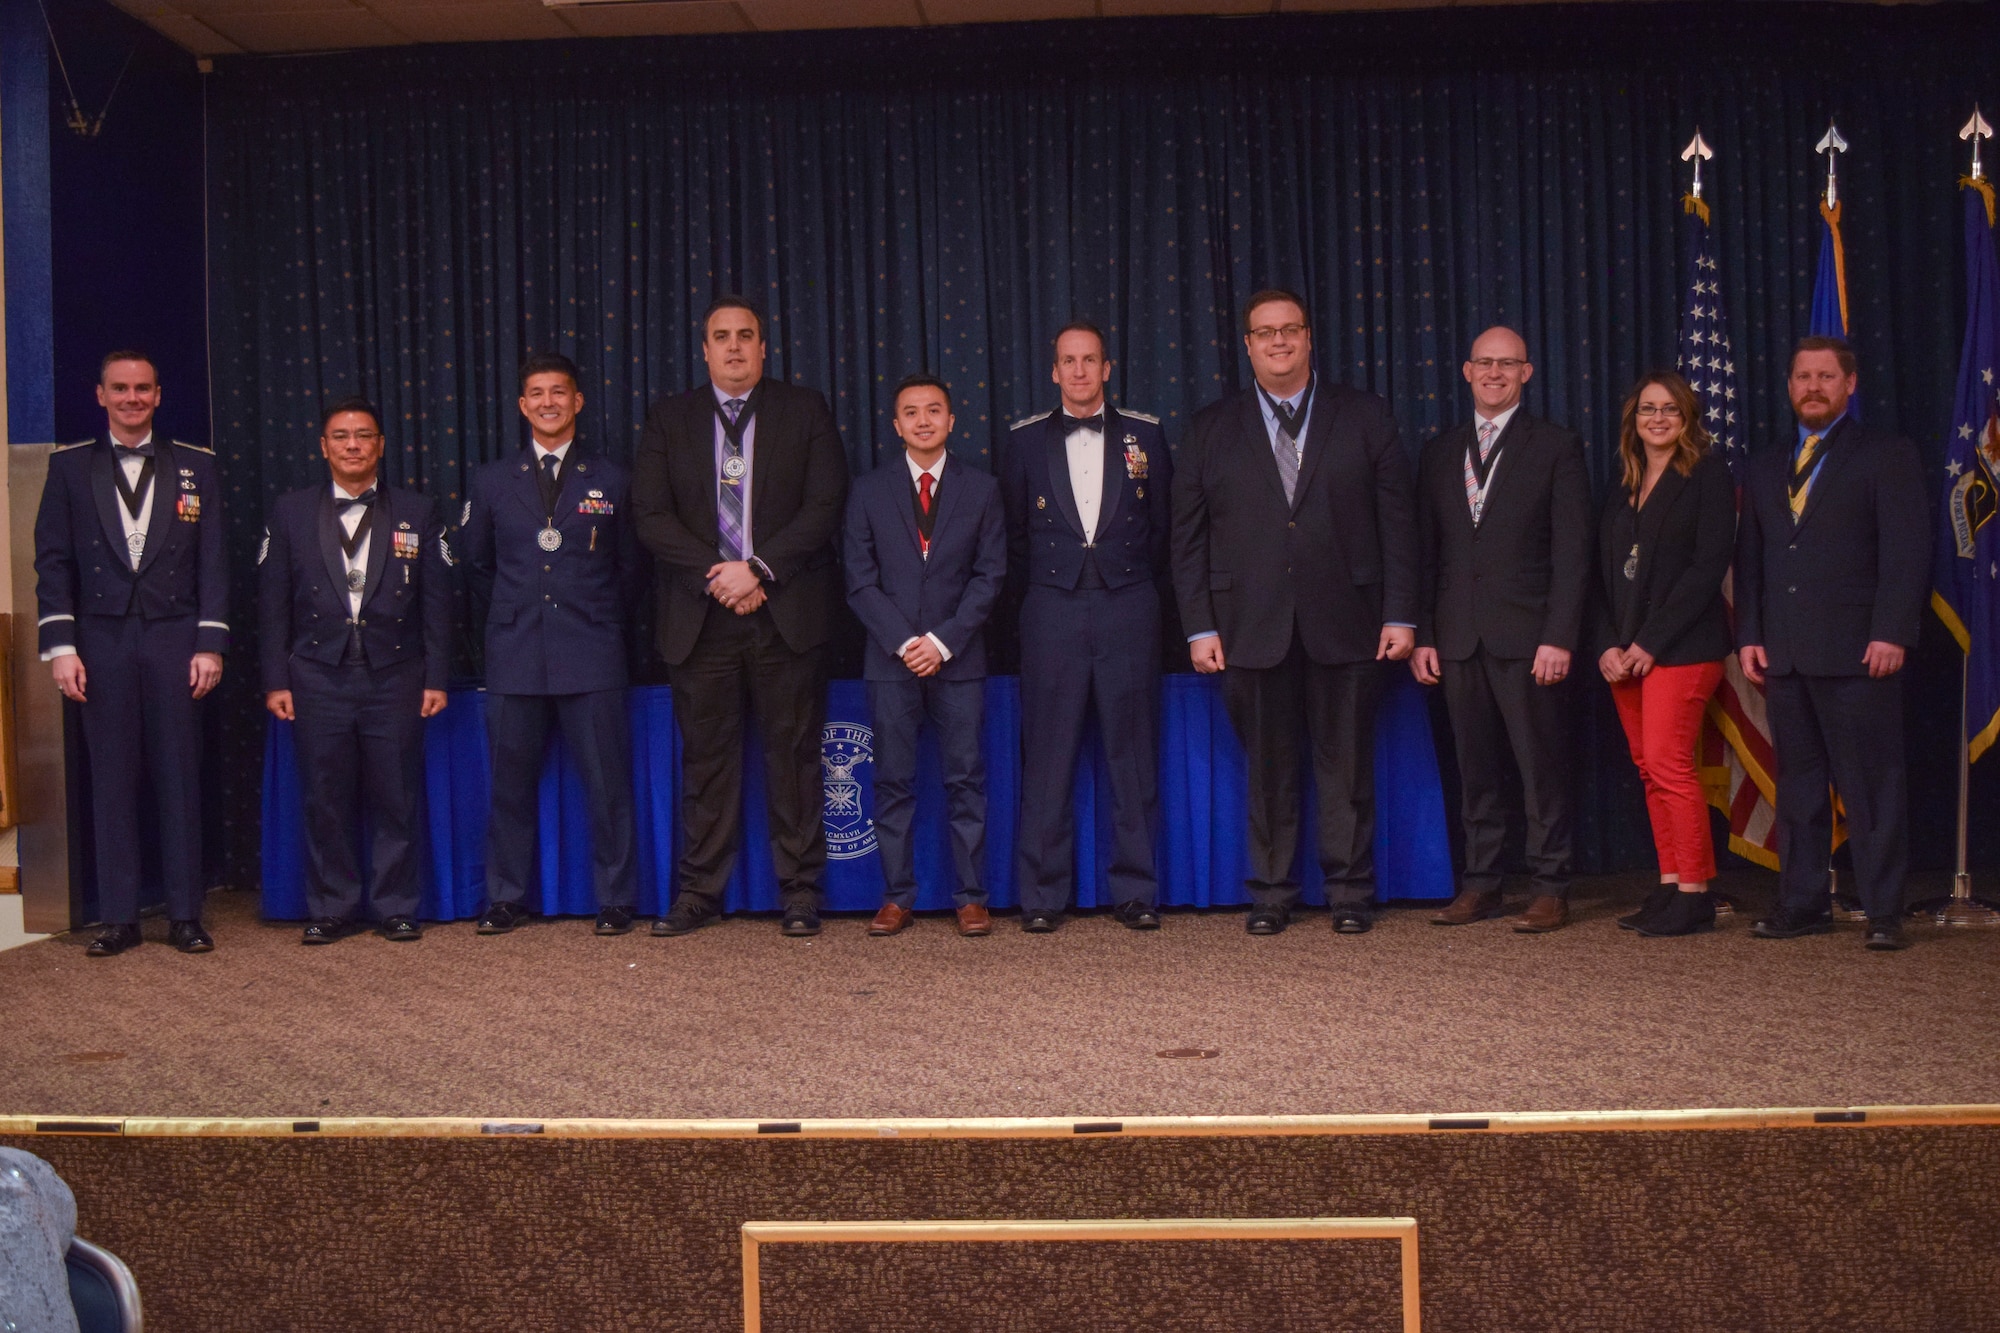 The Air Force Nuclear Weapons Center commander, Maj. Gen. Shaun Morris, congratulates the center’s annual award winners at a ceremony on Jan. 24, 2019, at the Mountain View Club, Kirtland AFB, New Mexico.  Pictured left to right:  Maj. Allen DeNeve, Master Sgt. Brandon Tanaka, Technical Sgt. Donald DeRusha, Michael Hall, Khoa Dinh, Maj. Gen. Shaun Morris, Keith Lucas, Robert Watson, Katie Peterson and William Schanke.  See story for complete list of winners. (Courtesy photo)